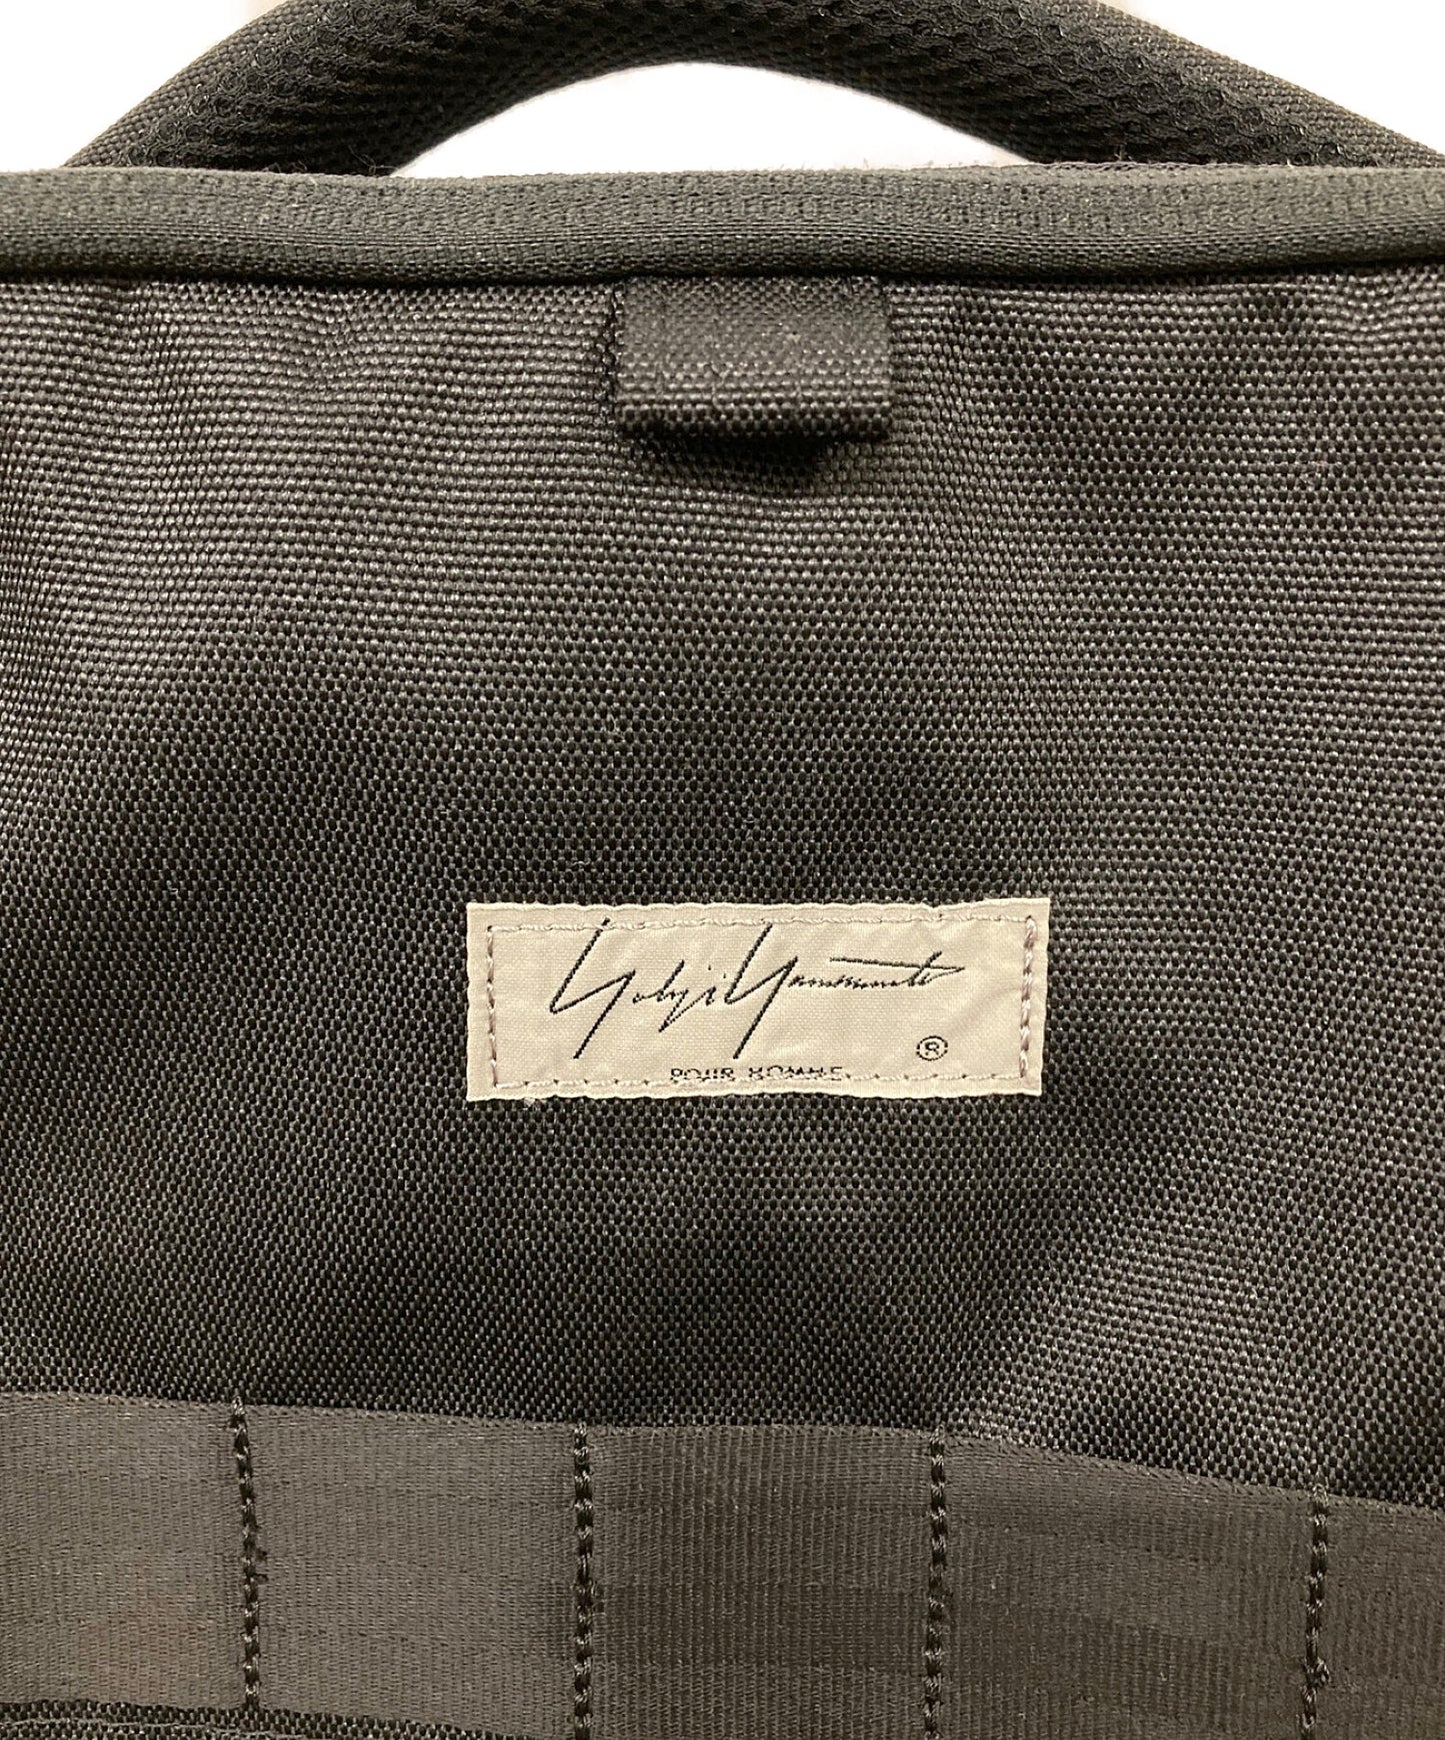 [Pre-owned] Yohji Yamamoto pour homme WHEEL BAG Carry Case HN-147-958